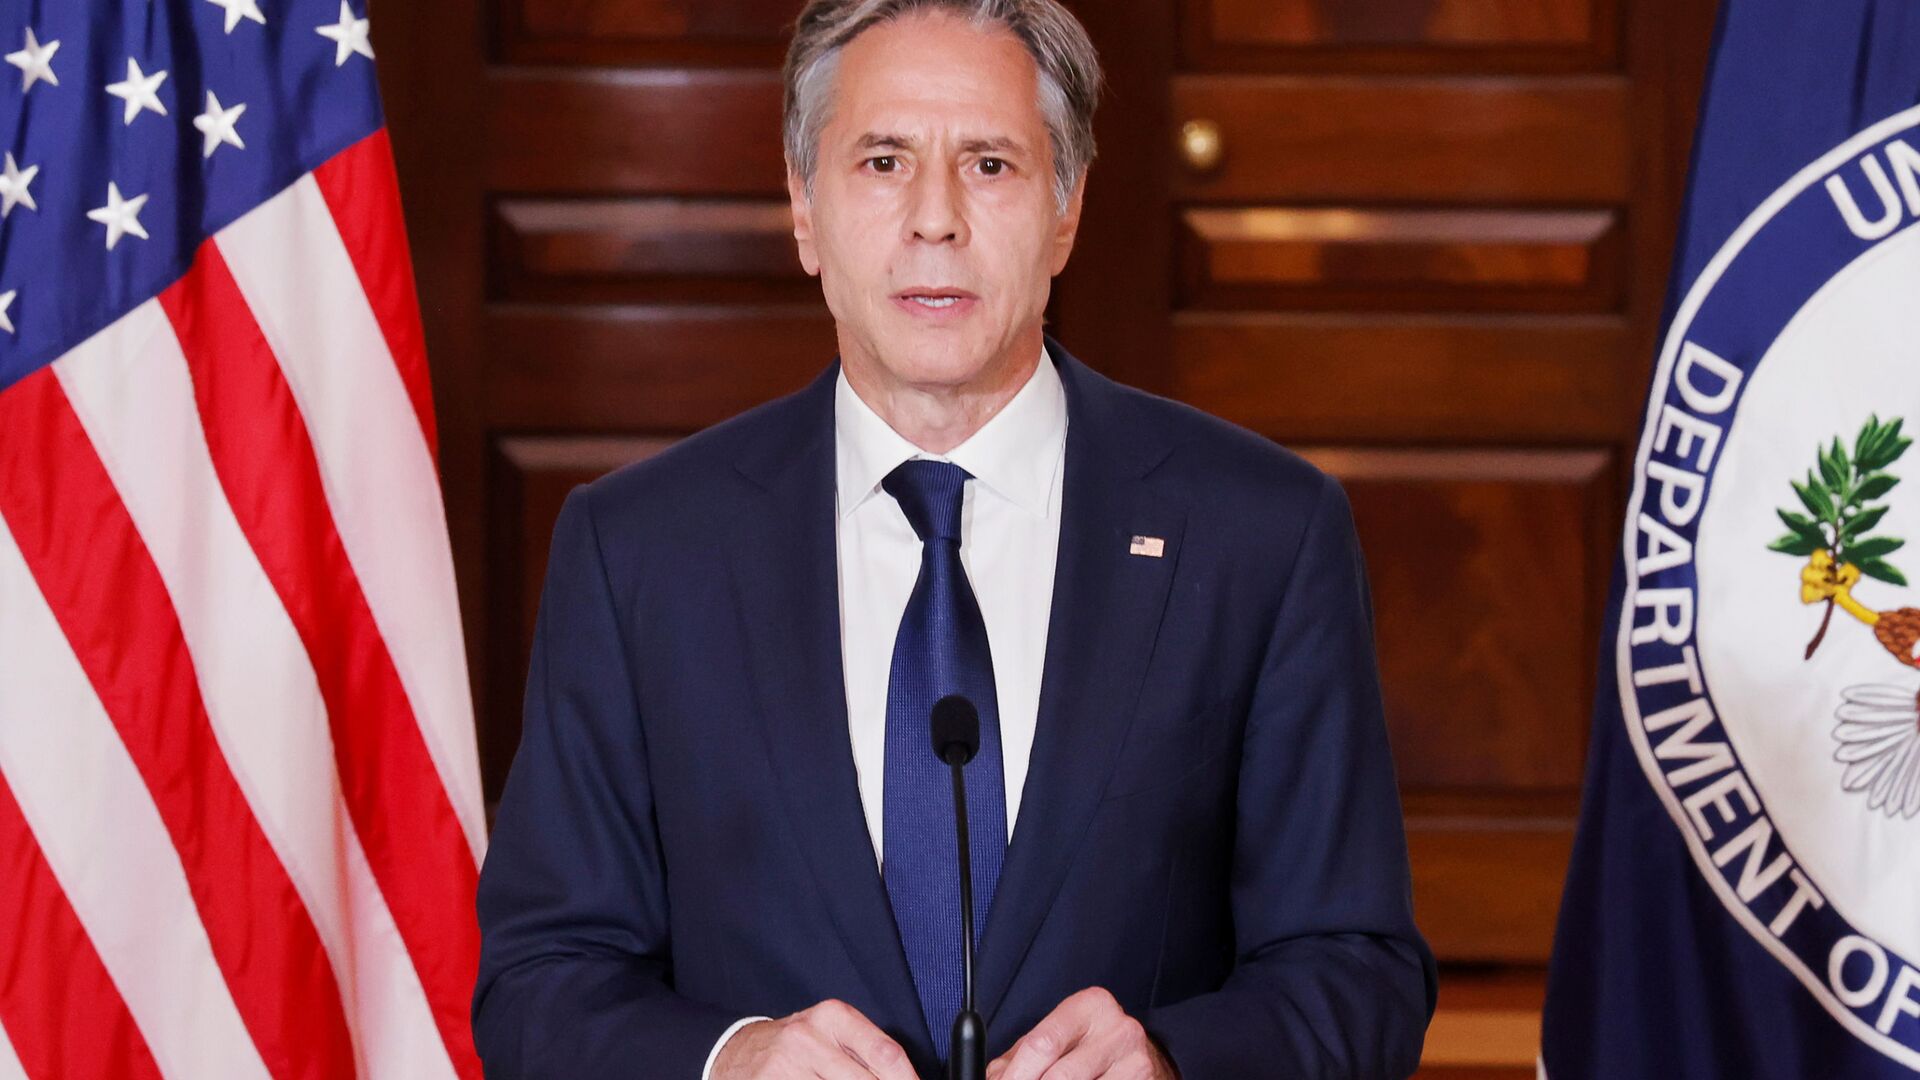 U.S. Secretary of State Antony Blinken delivers remarks following talks on the situation in Afghanistan, at the State Department in Washington, U.S., August 30, 2021 - Sputnik International, 1920, 31.08.2021